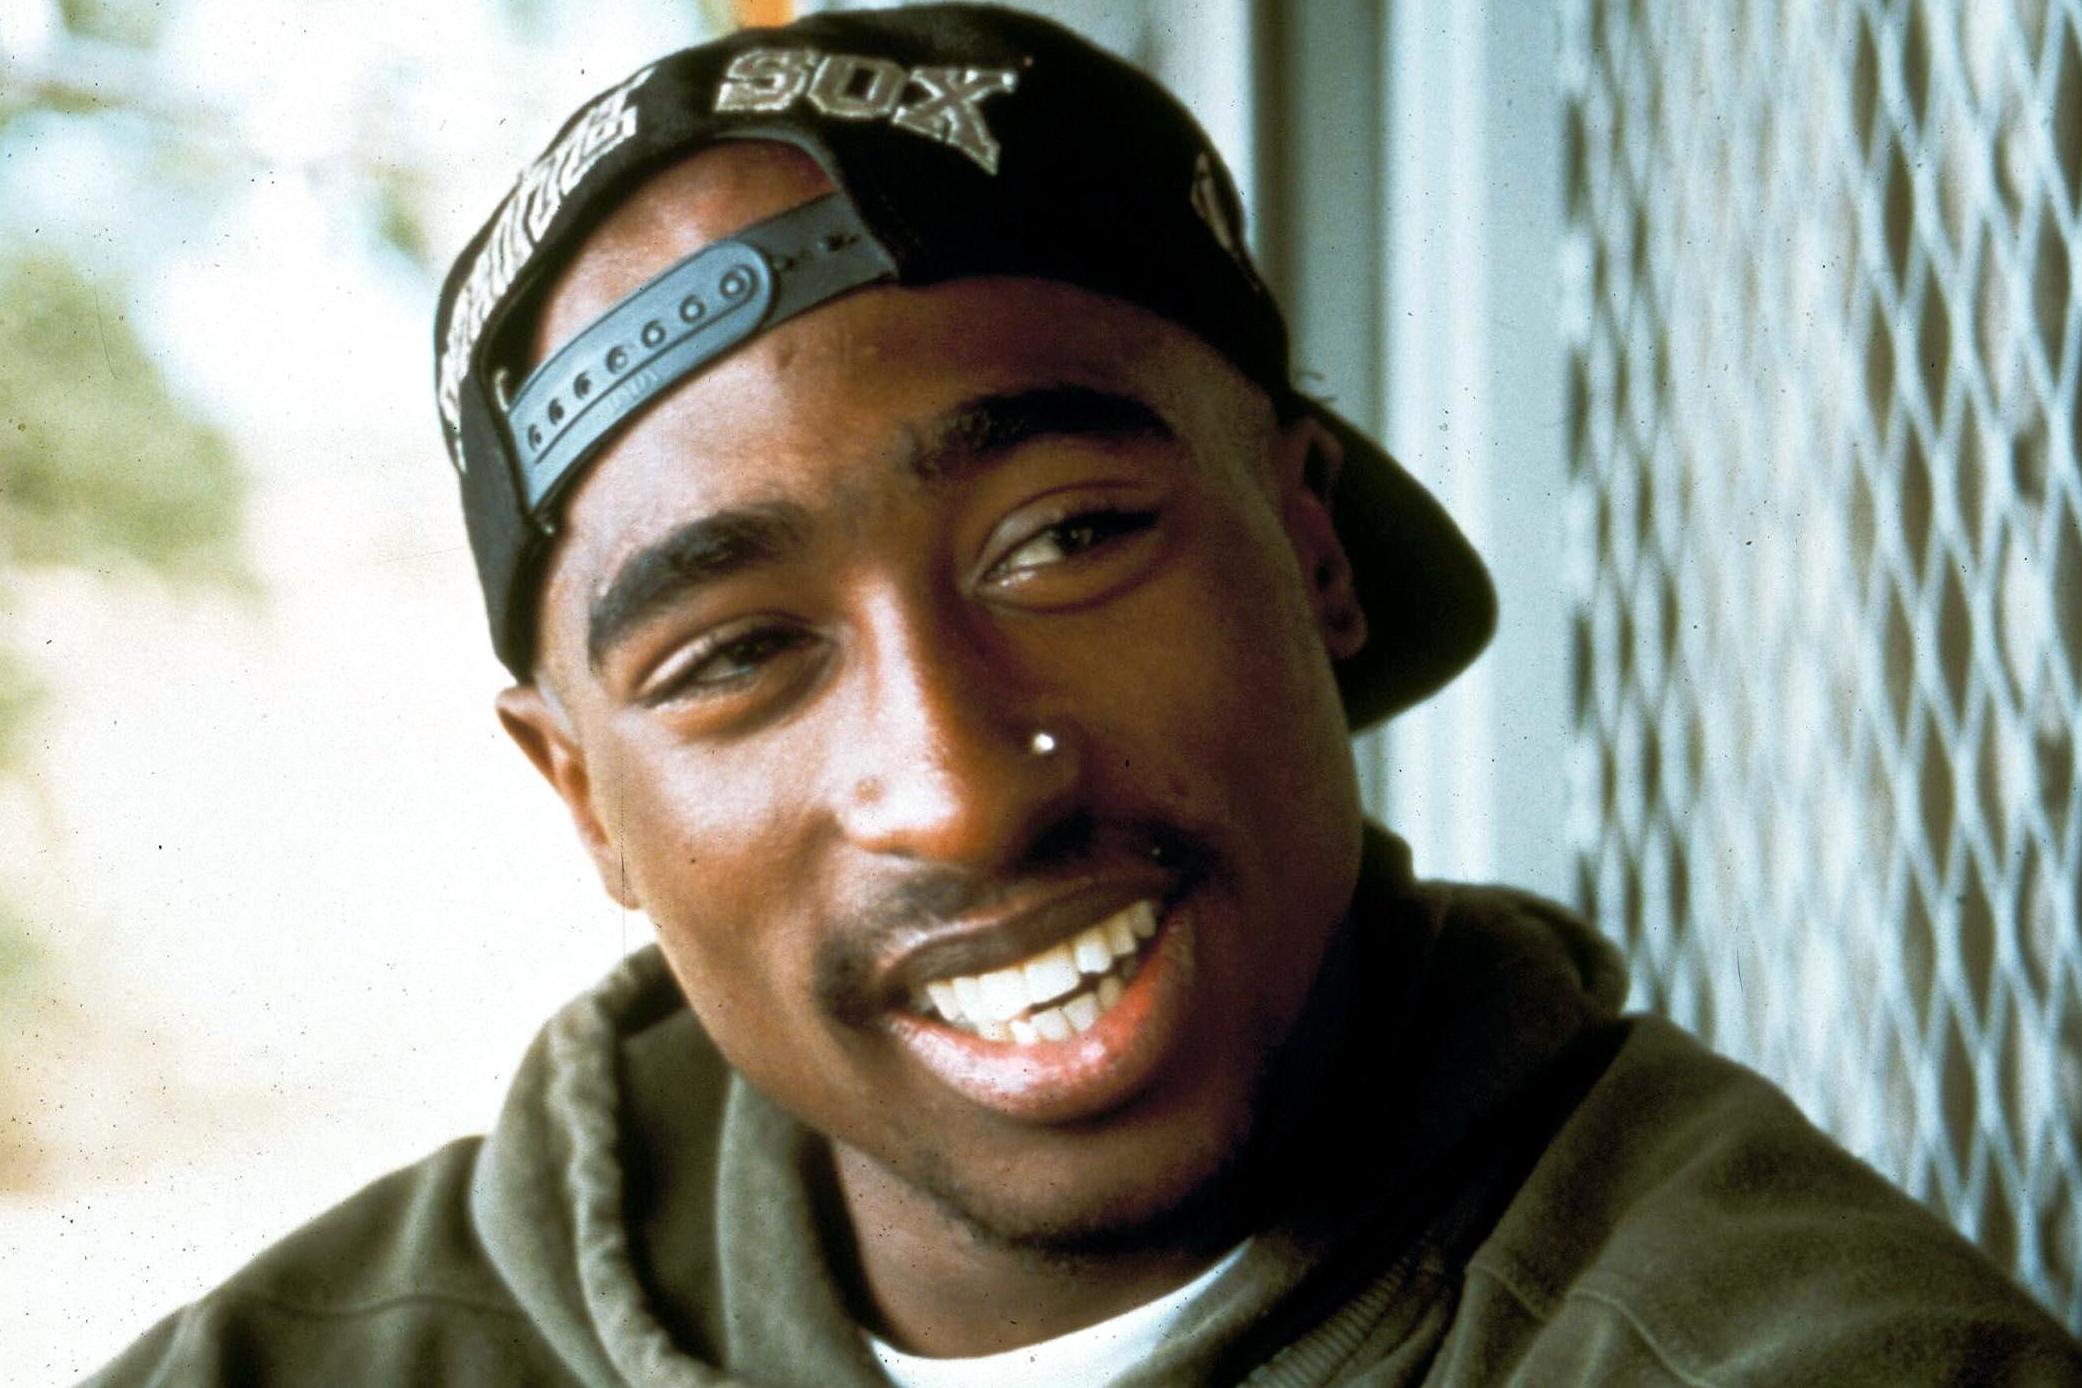 Official Fired For Emailing Tupac Lyrics To All 4 300 Colleagues